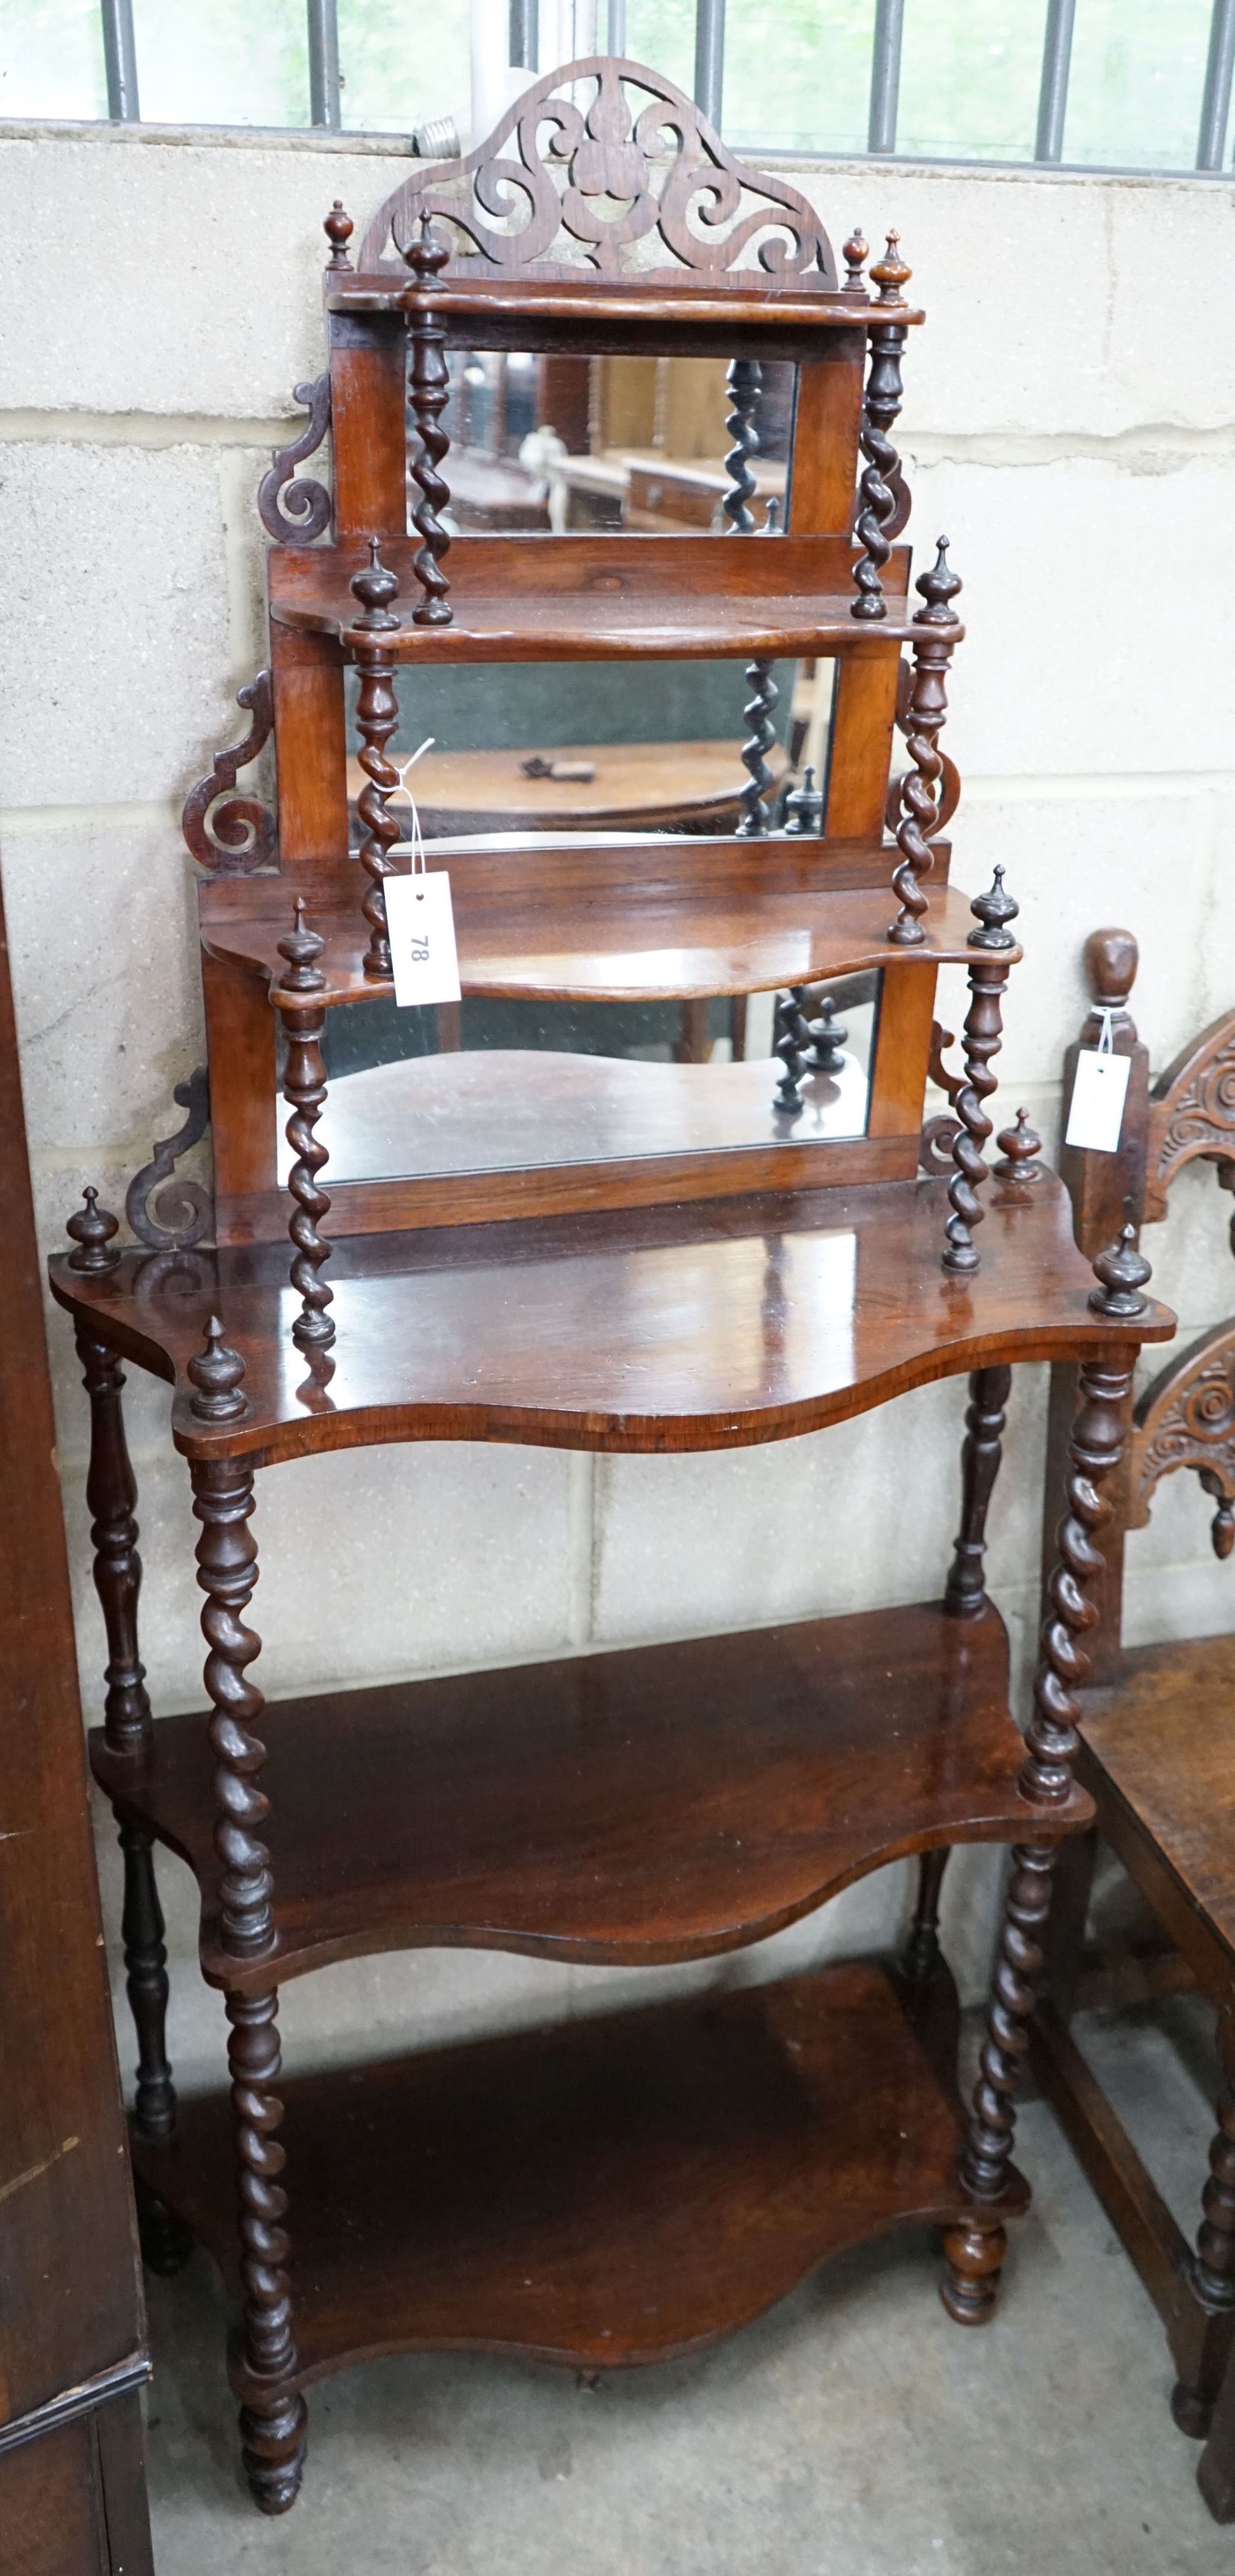 A late Victorian rosewood serpentine front six tier whatnot with mirror and barley twist support to shelves